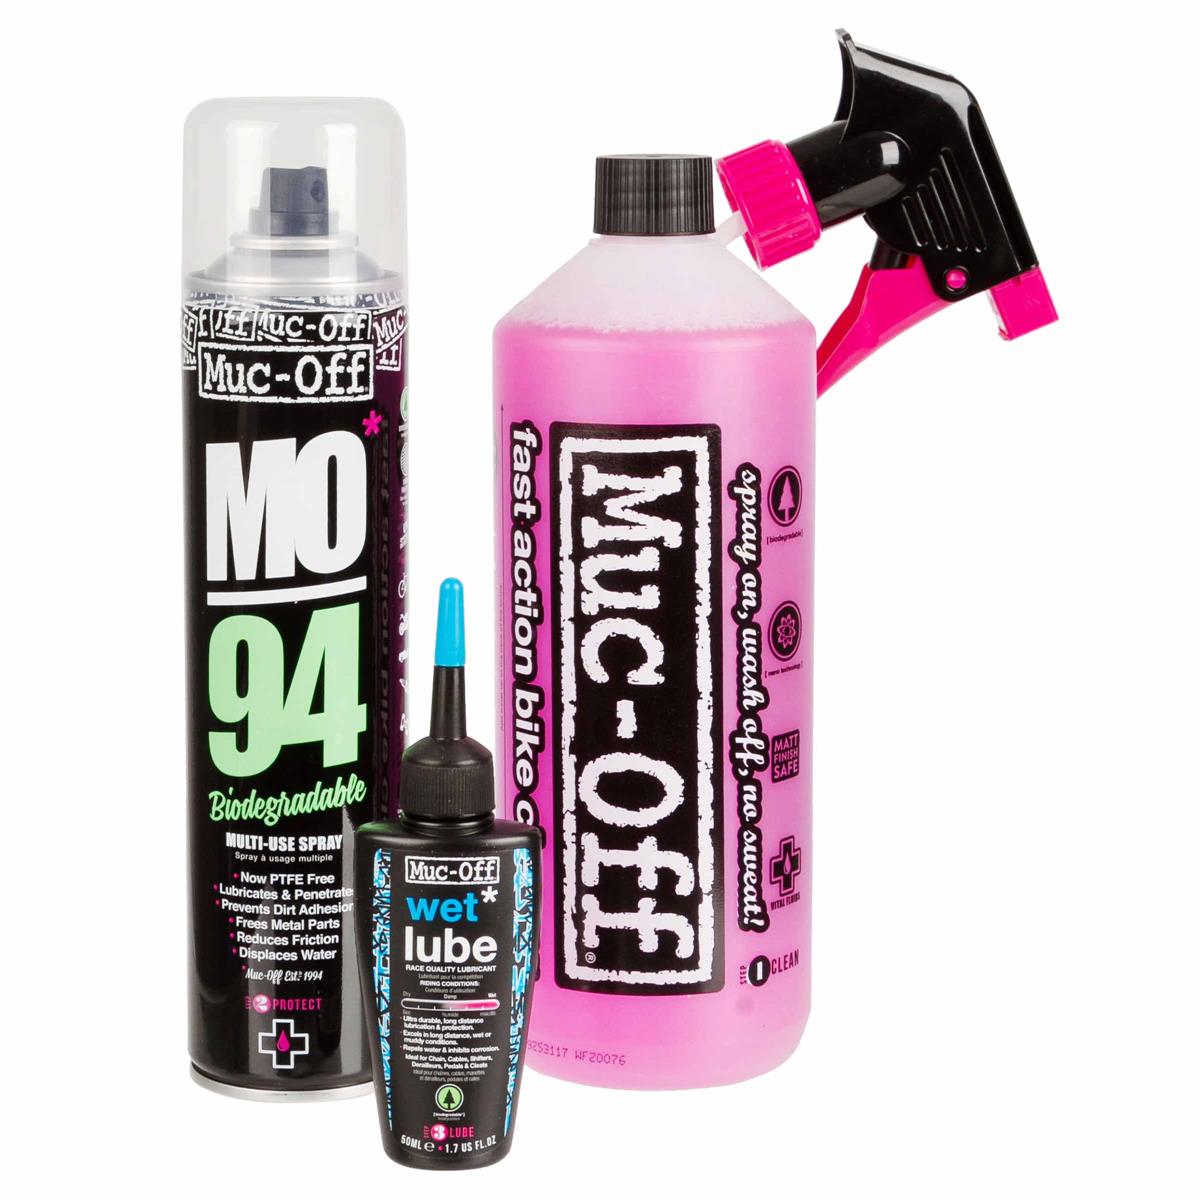 Muc-Off Nettoyant Velo Wash, Protect & Lube Kit 1,45 L